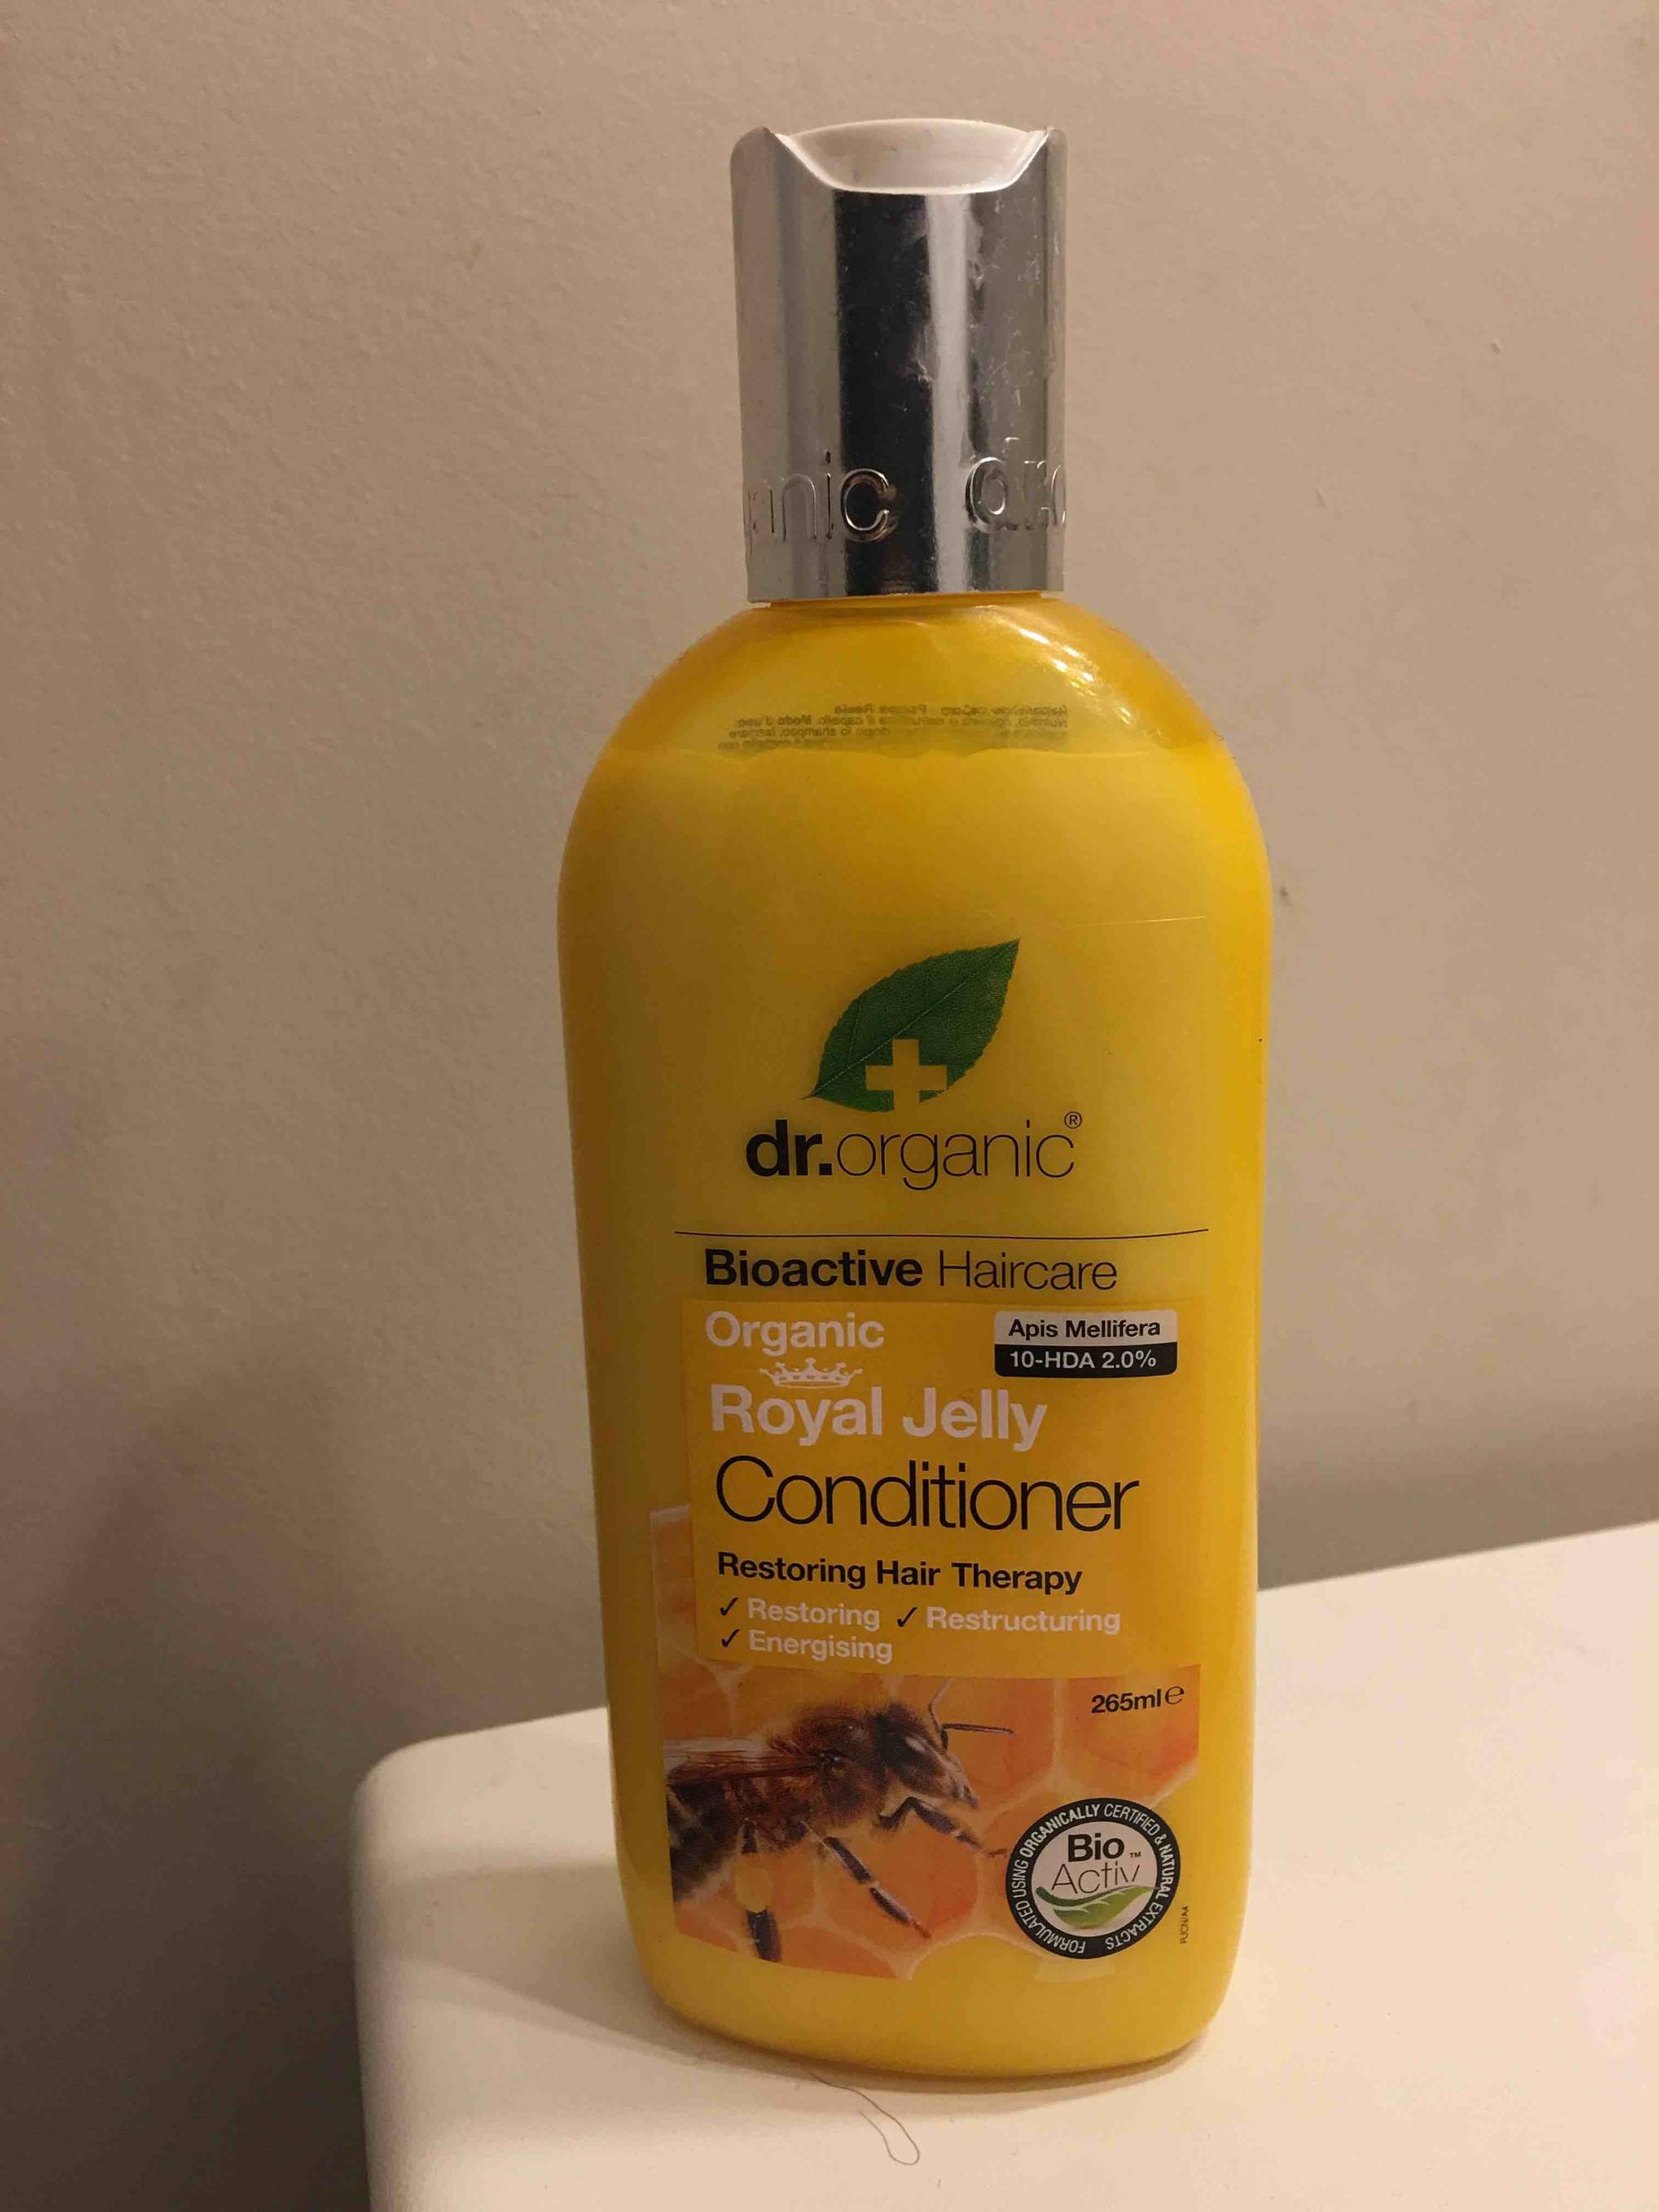 DR. ORGANIC - Bioactive haircaire - Organic royal jelly conditioner